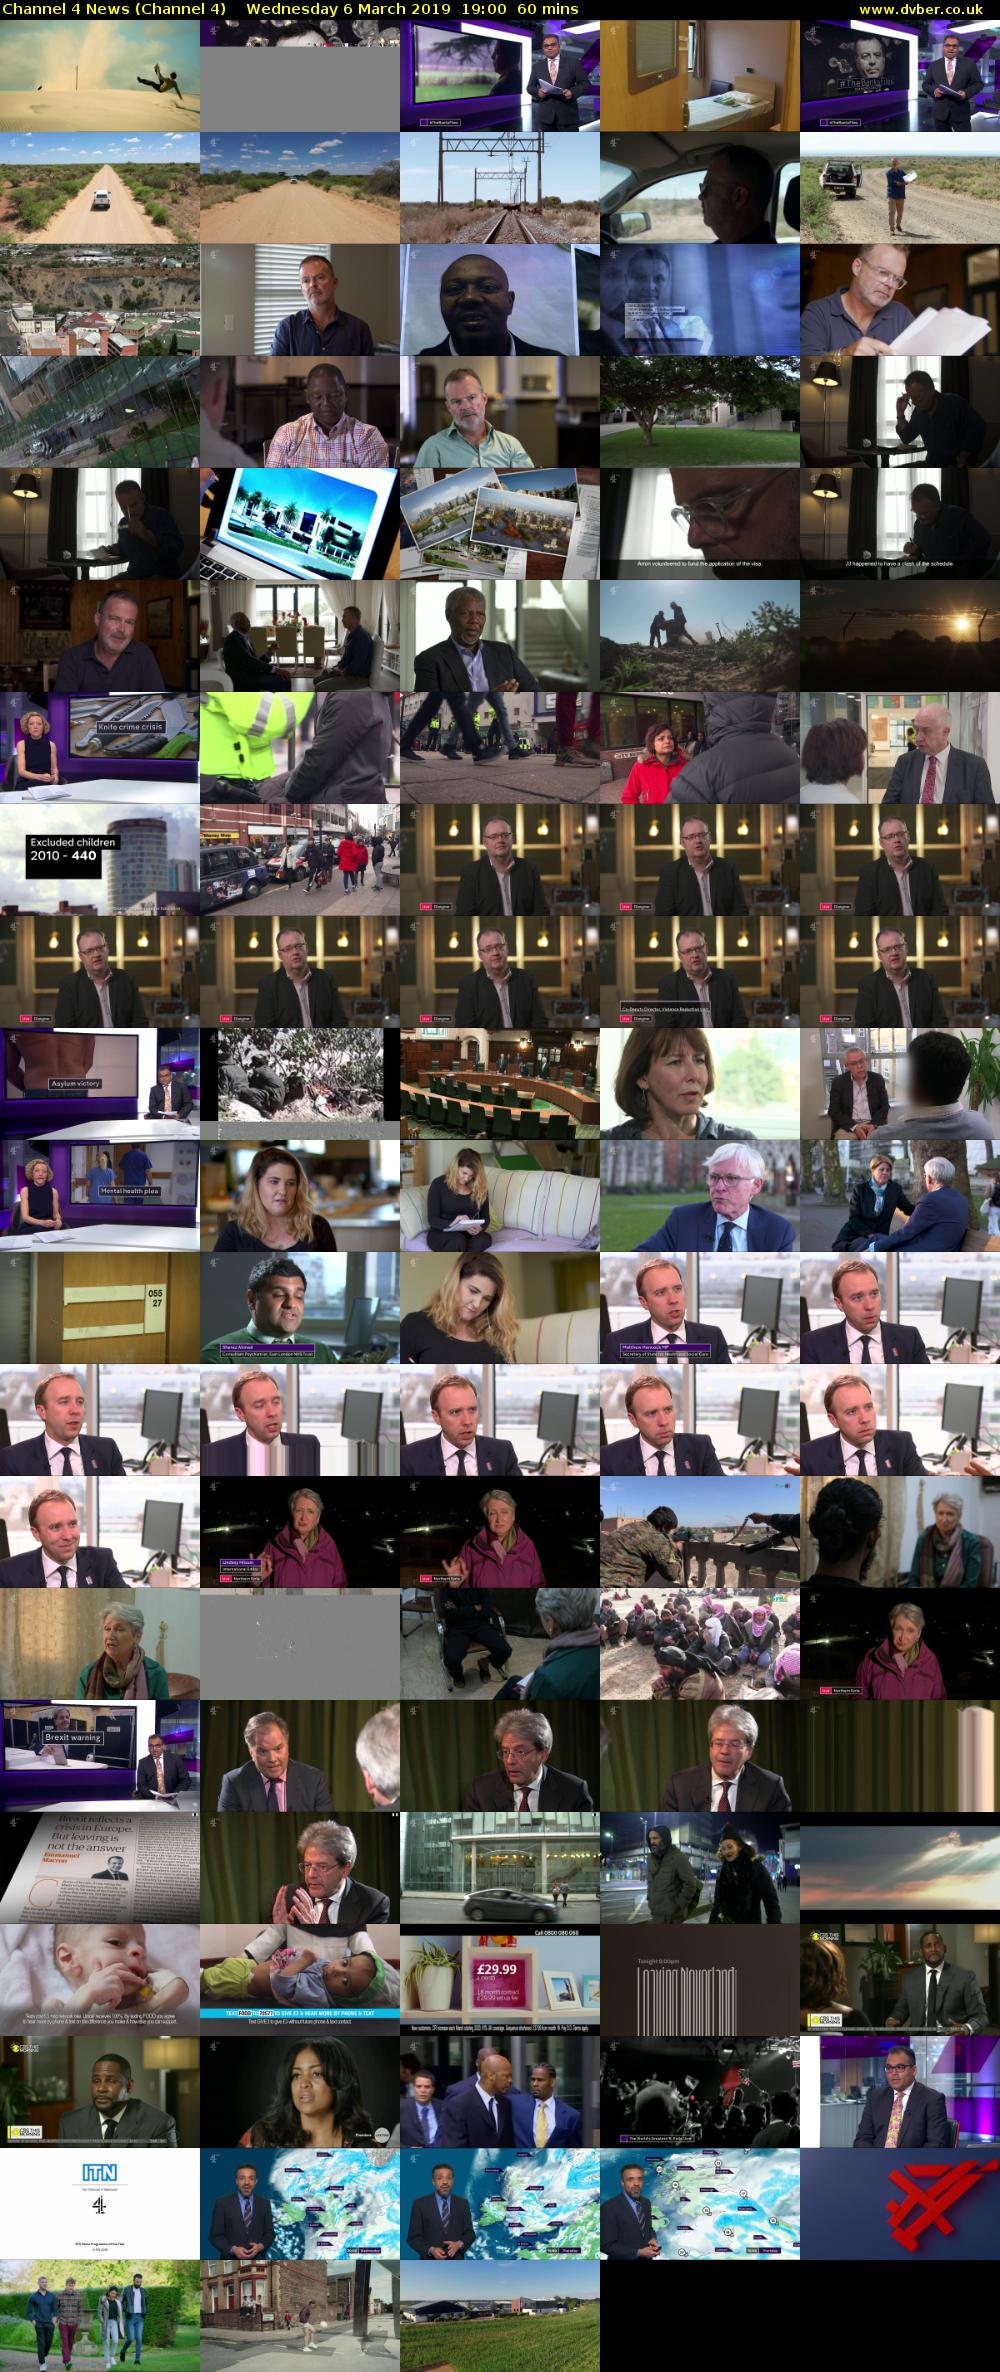 Channel 4 News (Channel 4) Wednesday 6 March 2019 19:00 - 20:00